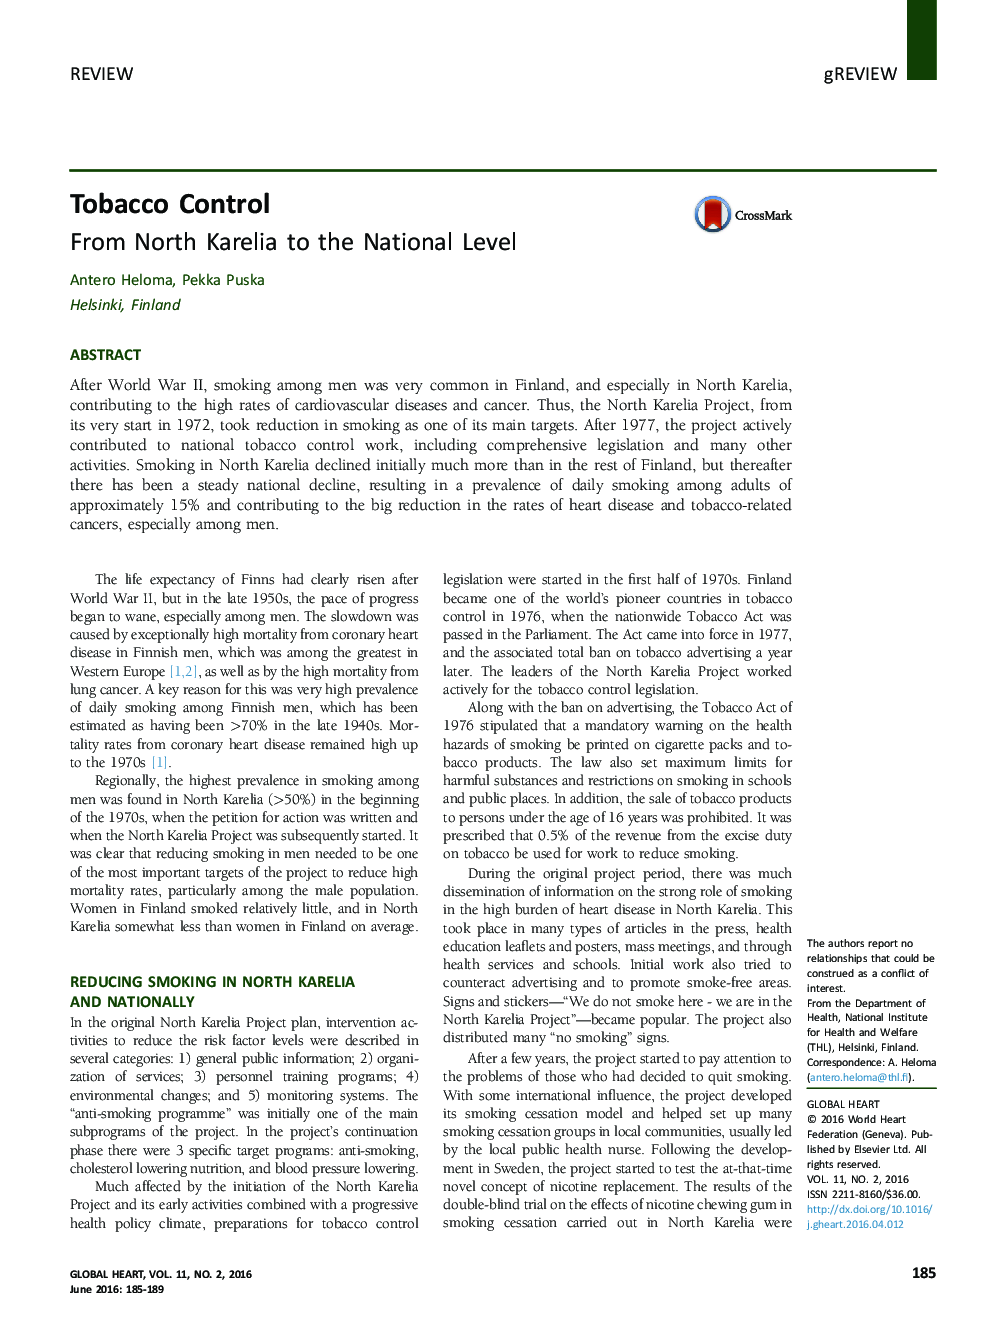 Tobacco Control : From North Karelia to the National Level